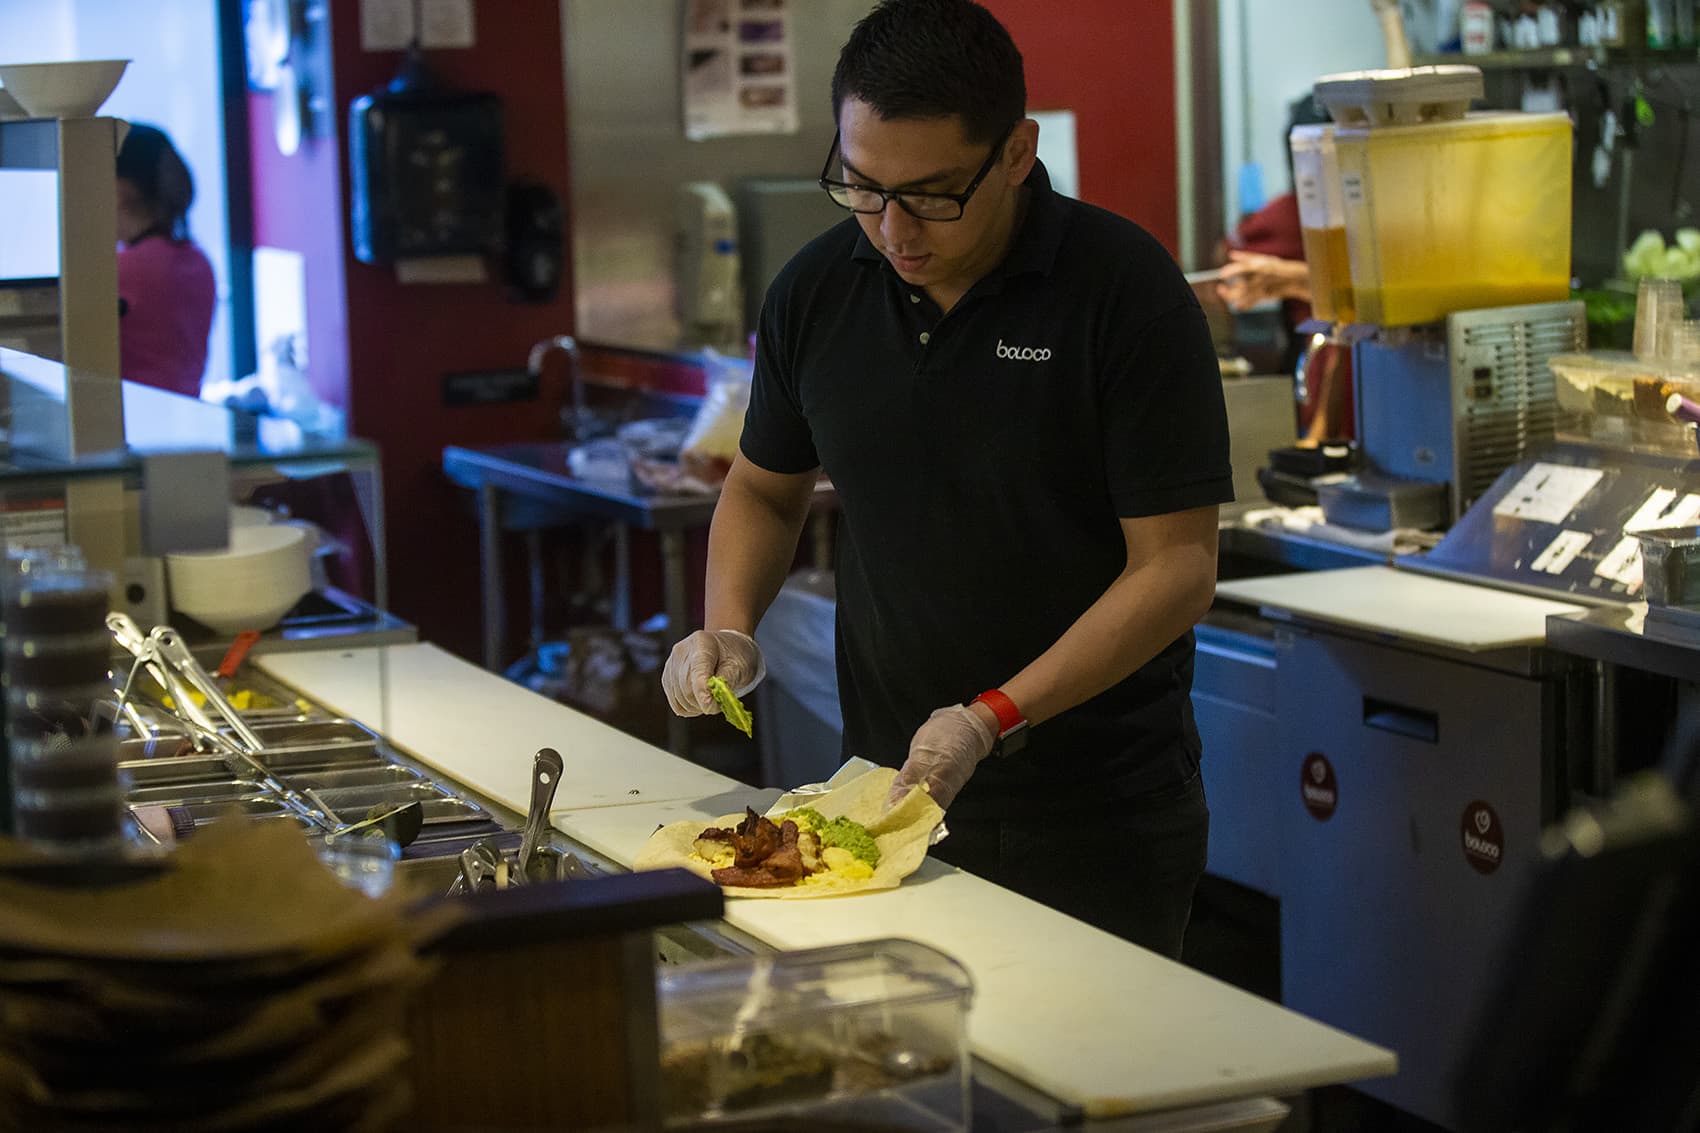 Boloco manager Erick Guitierrez slaps some guacamole onto a breakfast burrito he is making for a customer using the “Food For All” app. (Jesse Costa/WBUR)